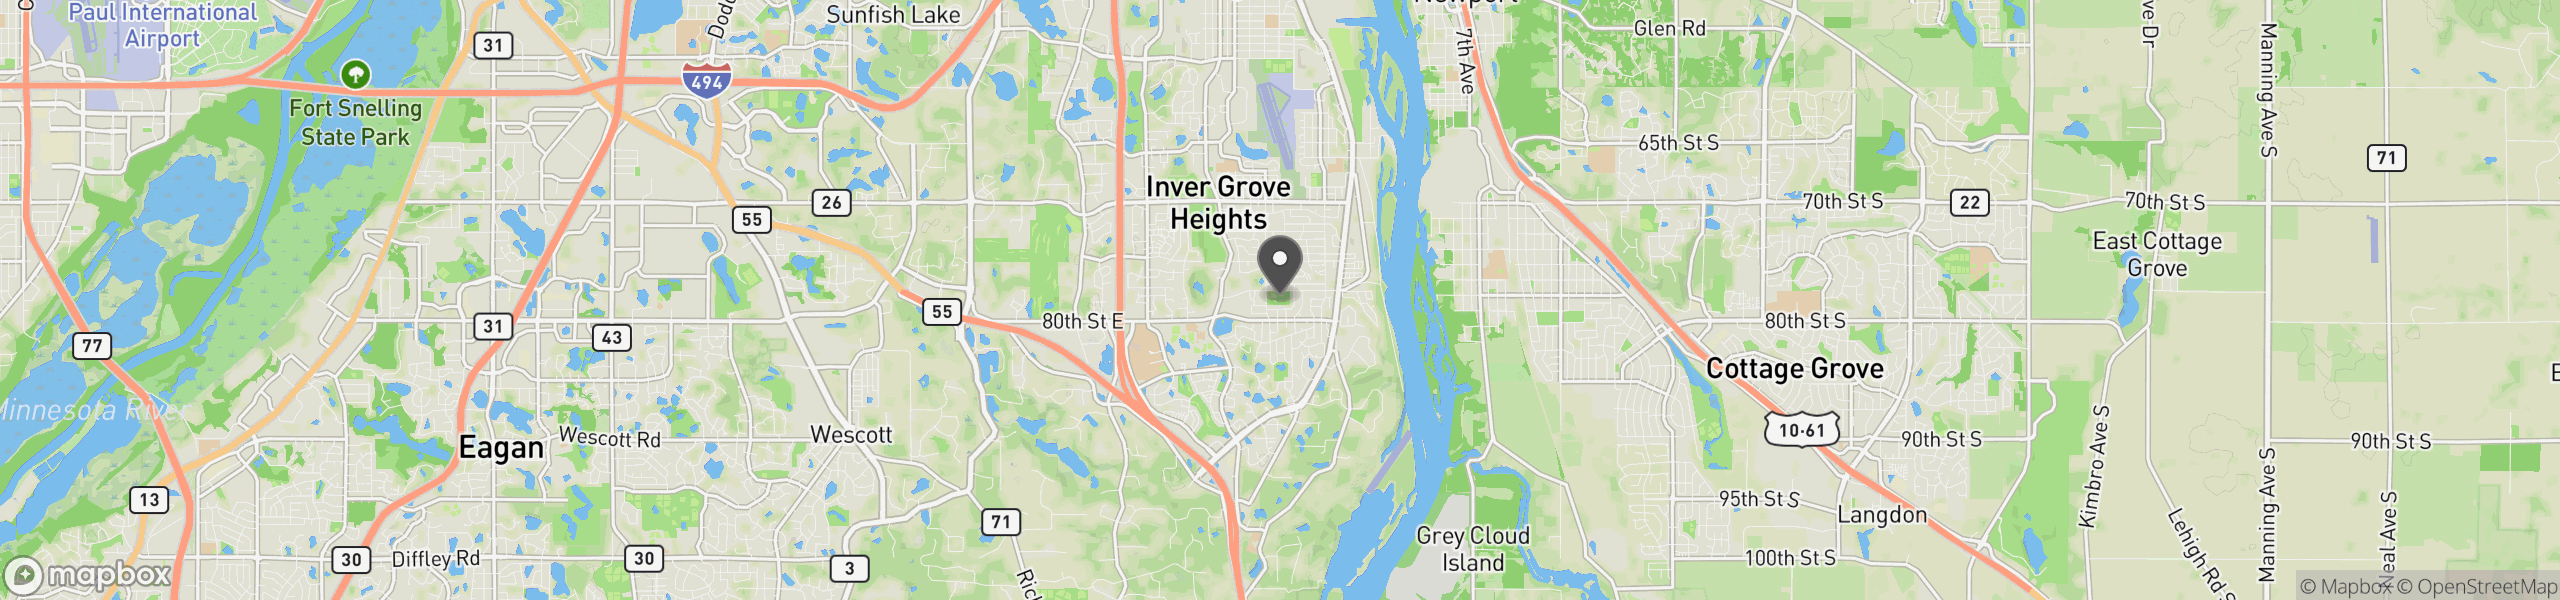 Inver Grove Heights, MN